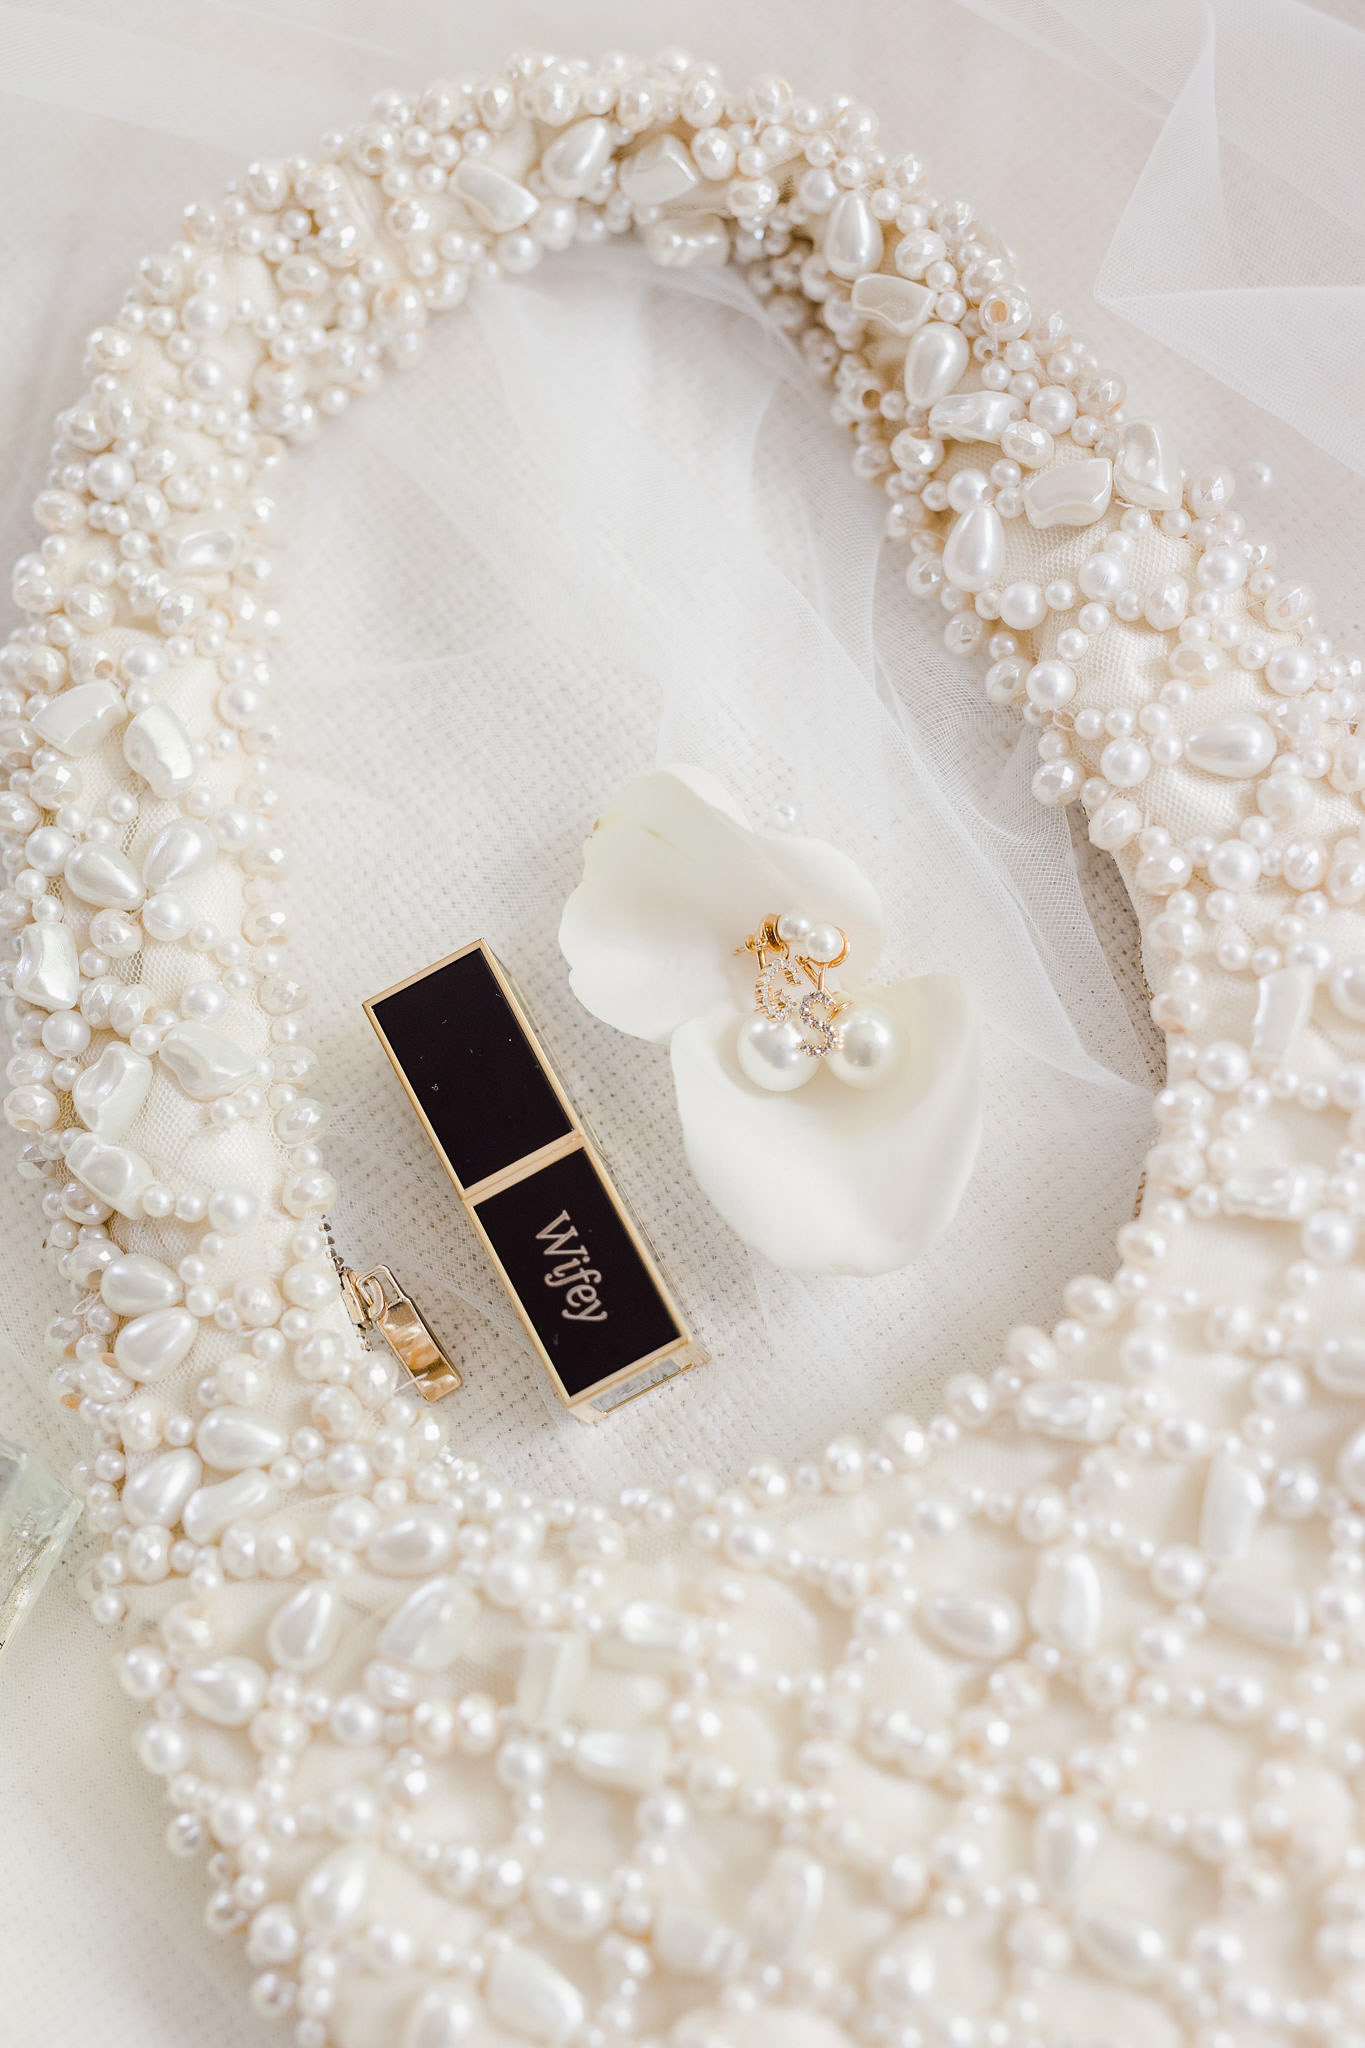 A white purse with pearls and jewelry on it.